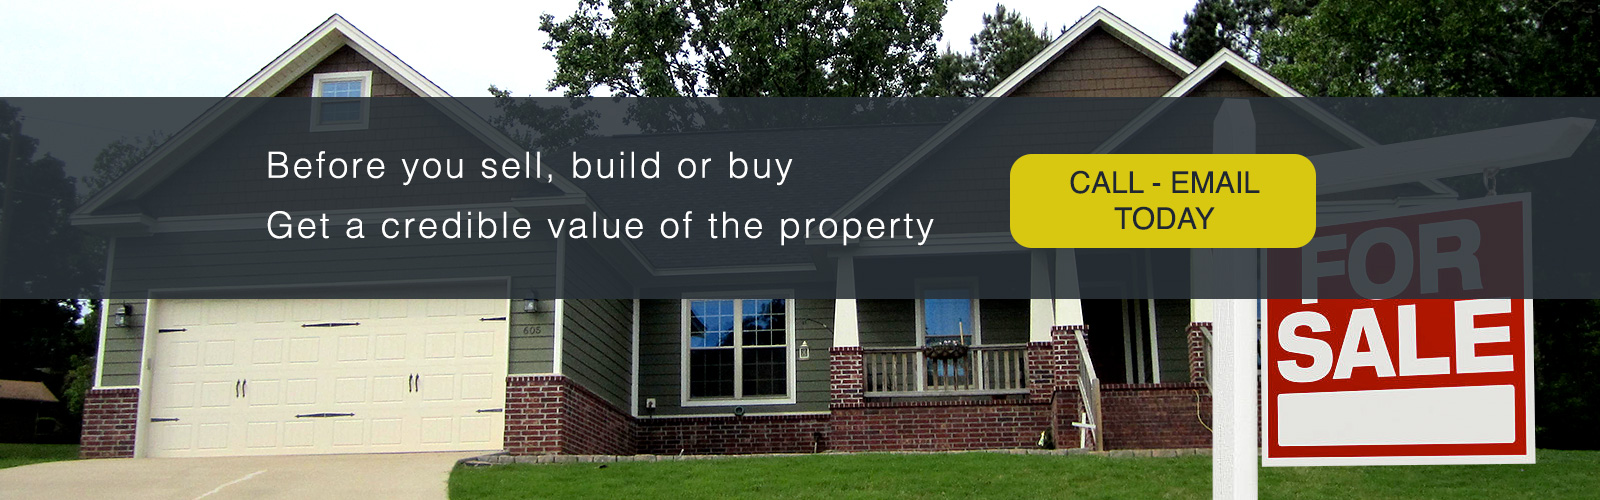 Before you sell, build or buy Get an accurate value of the property